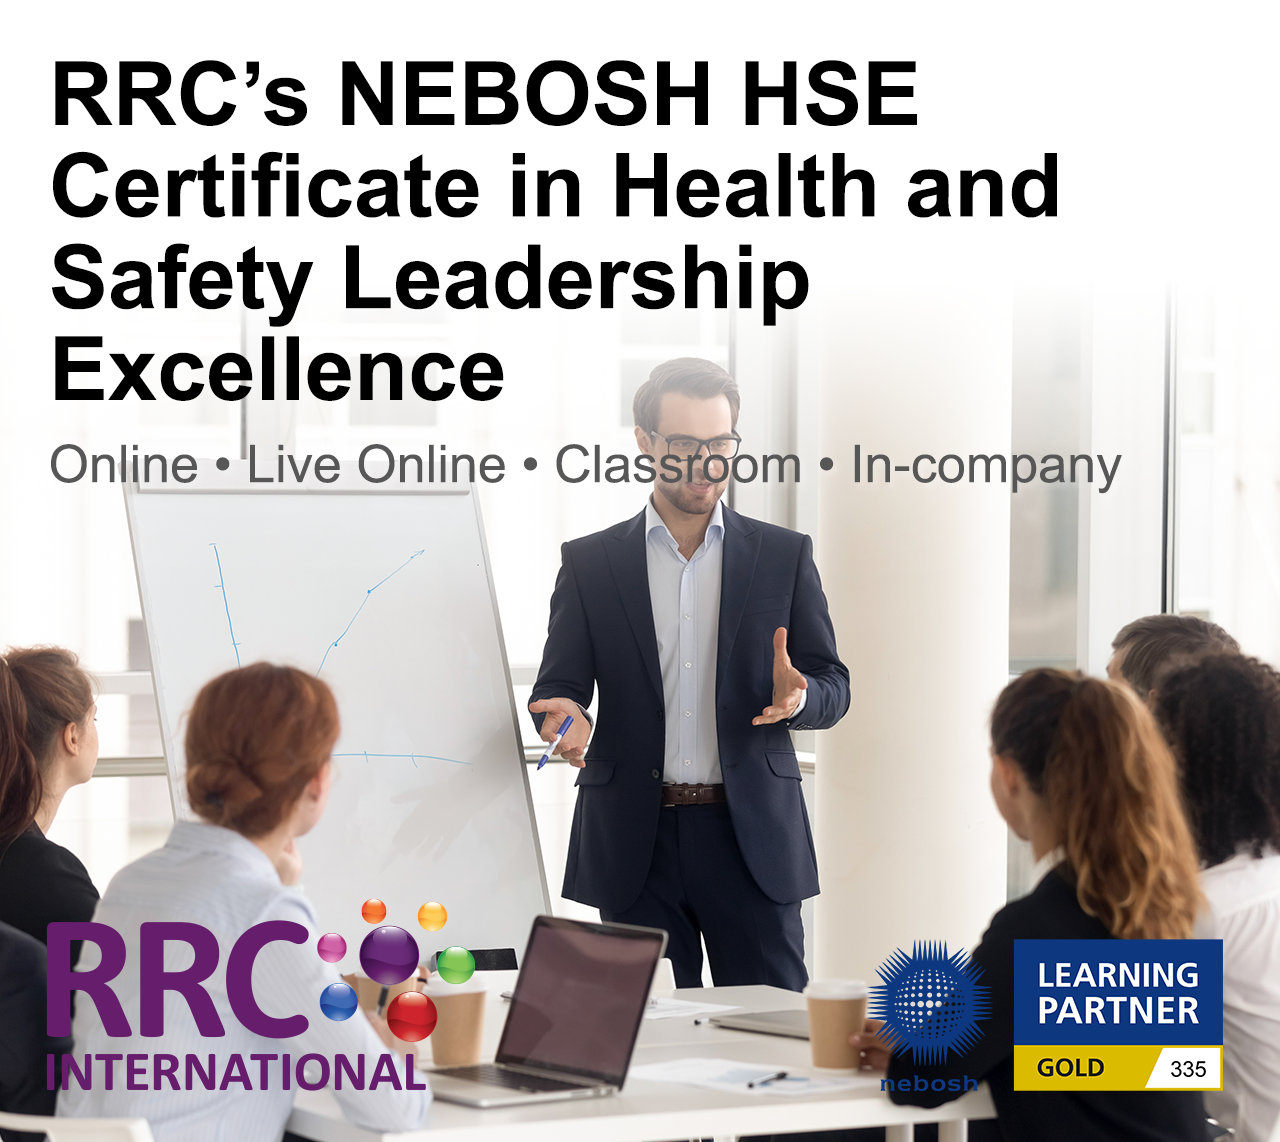 RRC's NEBOSH HSE Certificate in Health & Safety Leadership Excellence